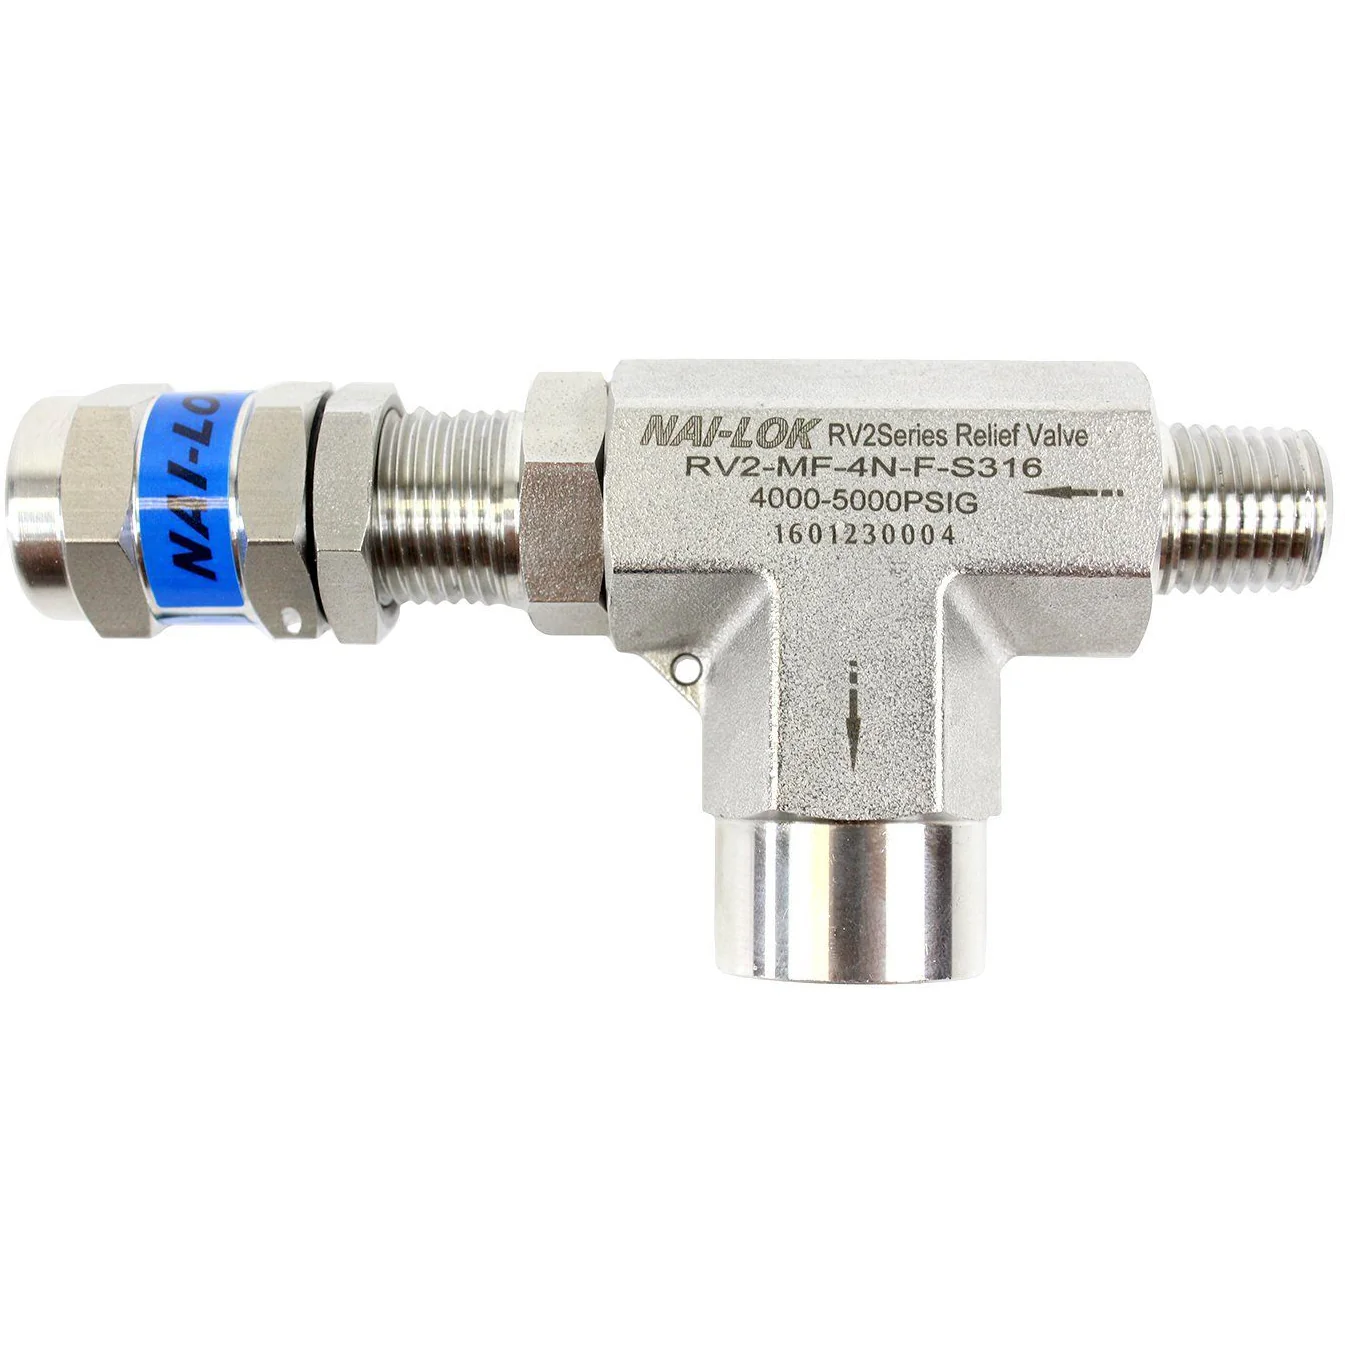 Nai-Lok - Adjustable Pressure Relief Valve Questions & Answers